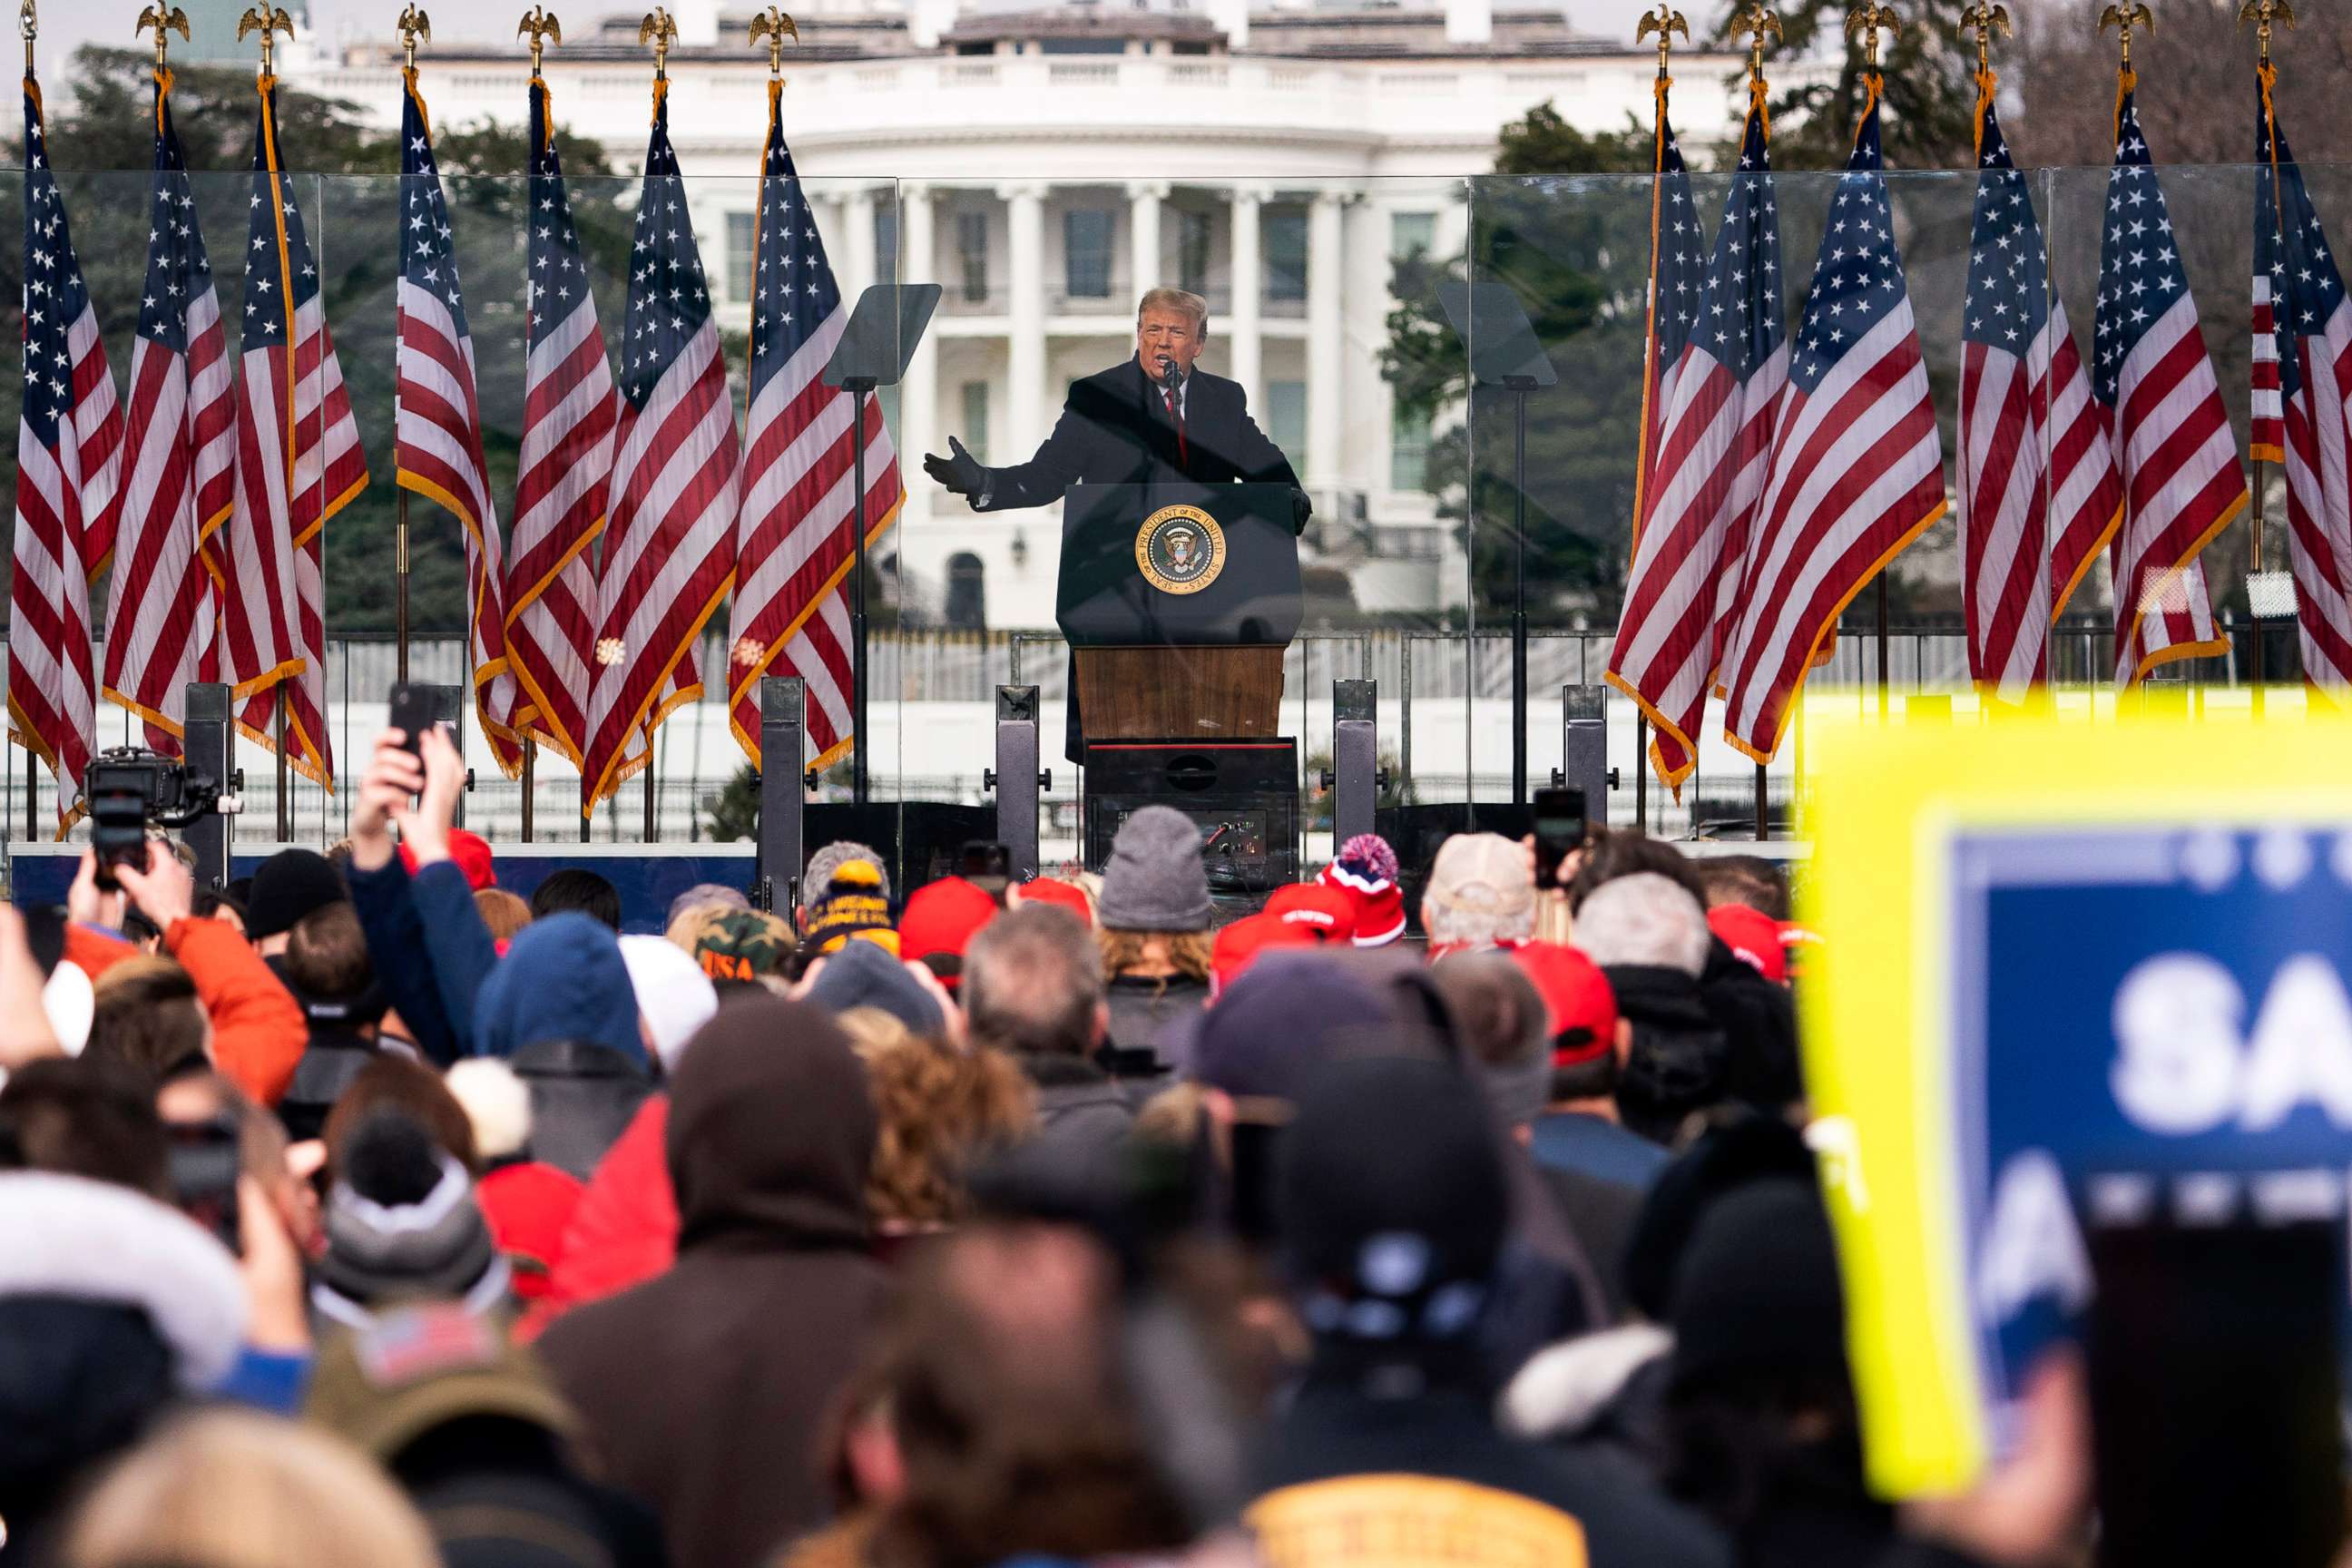 PHOTO: President Donald Trump speaks during a rally, Jan. 6, 2021, in Washington.